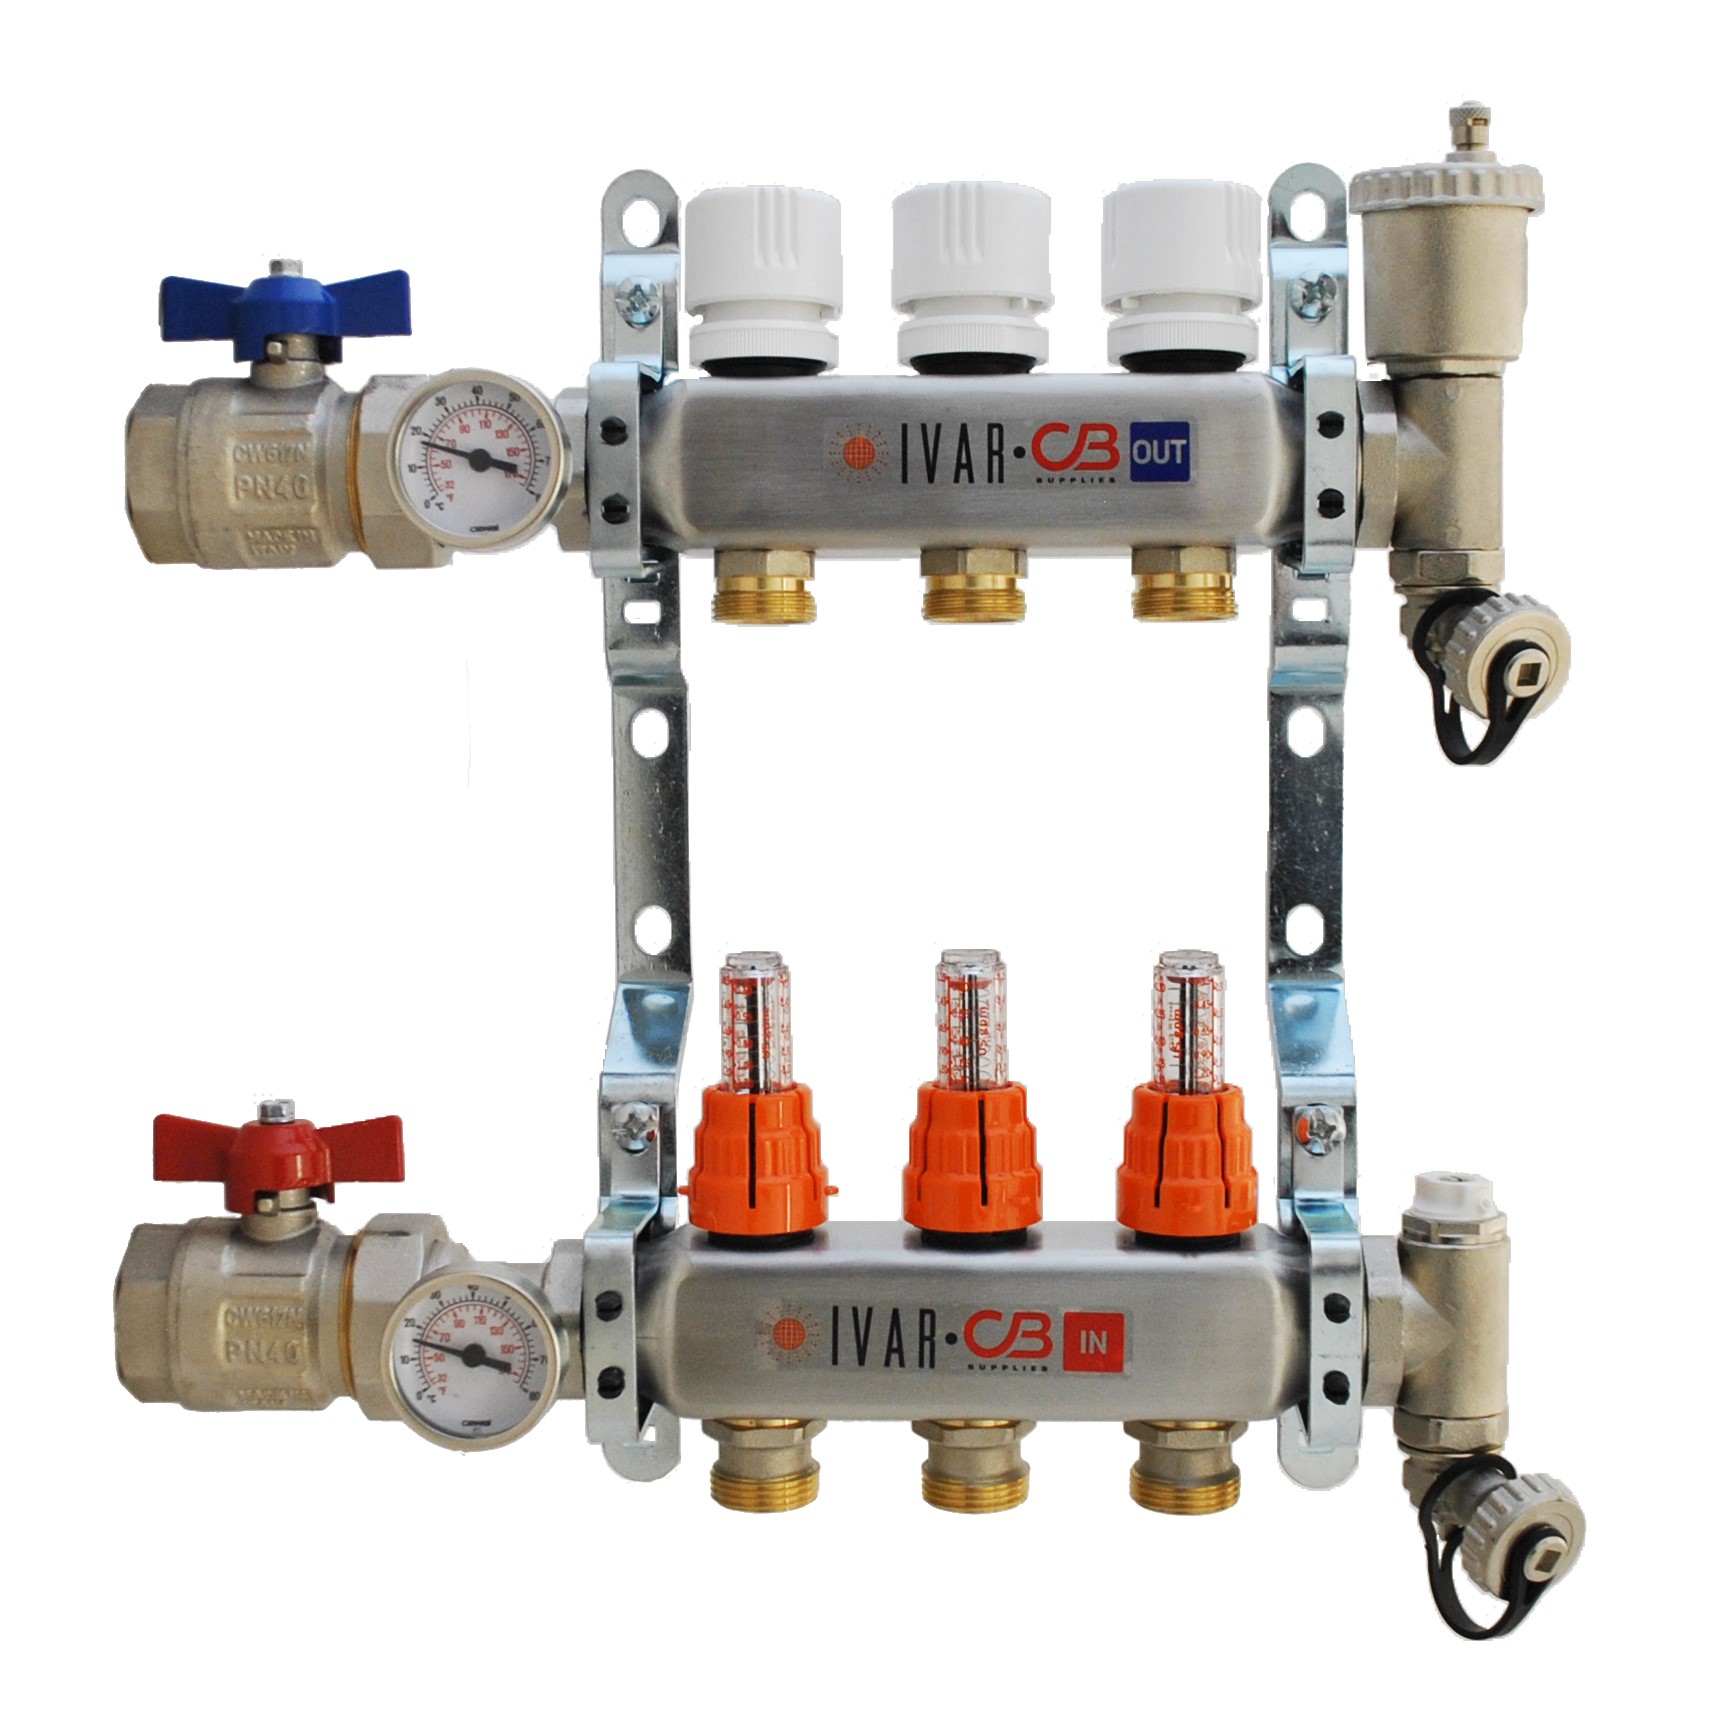 1" IVAR Stainless Steel Hydronic Manifold for Radiant Floor Heating - 3 ports